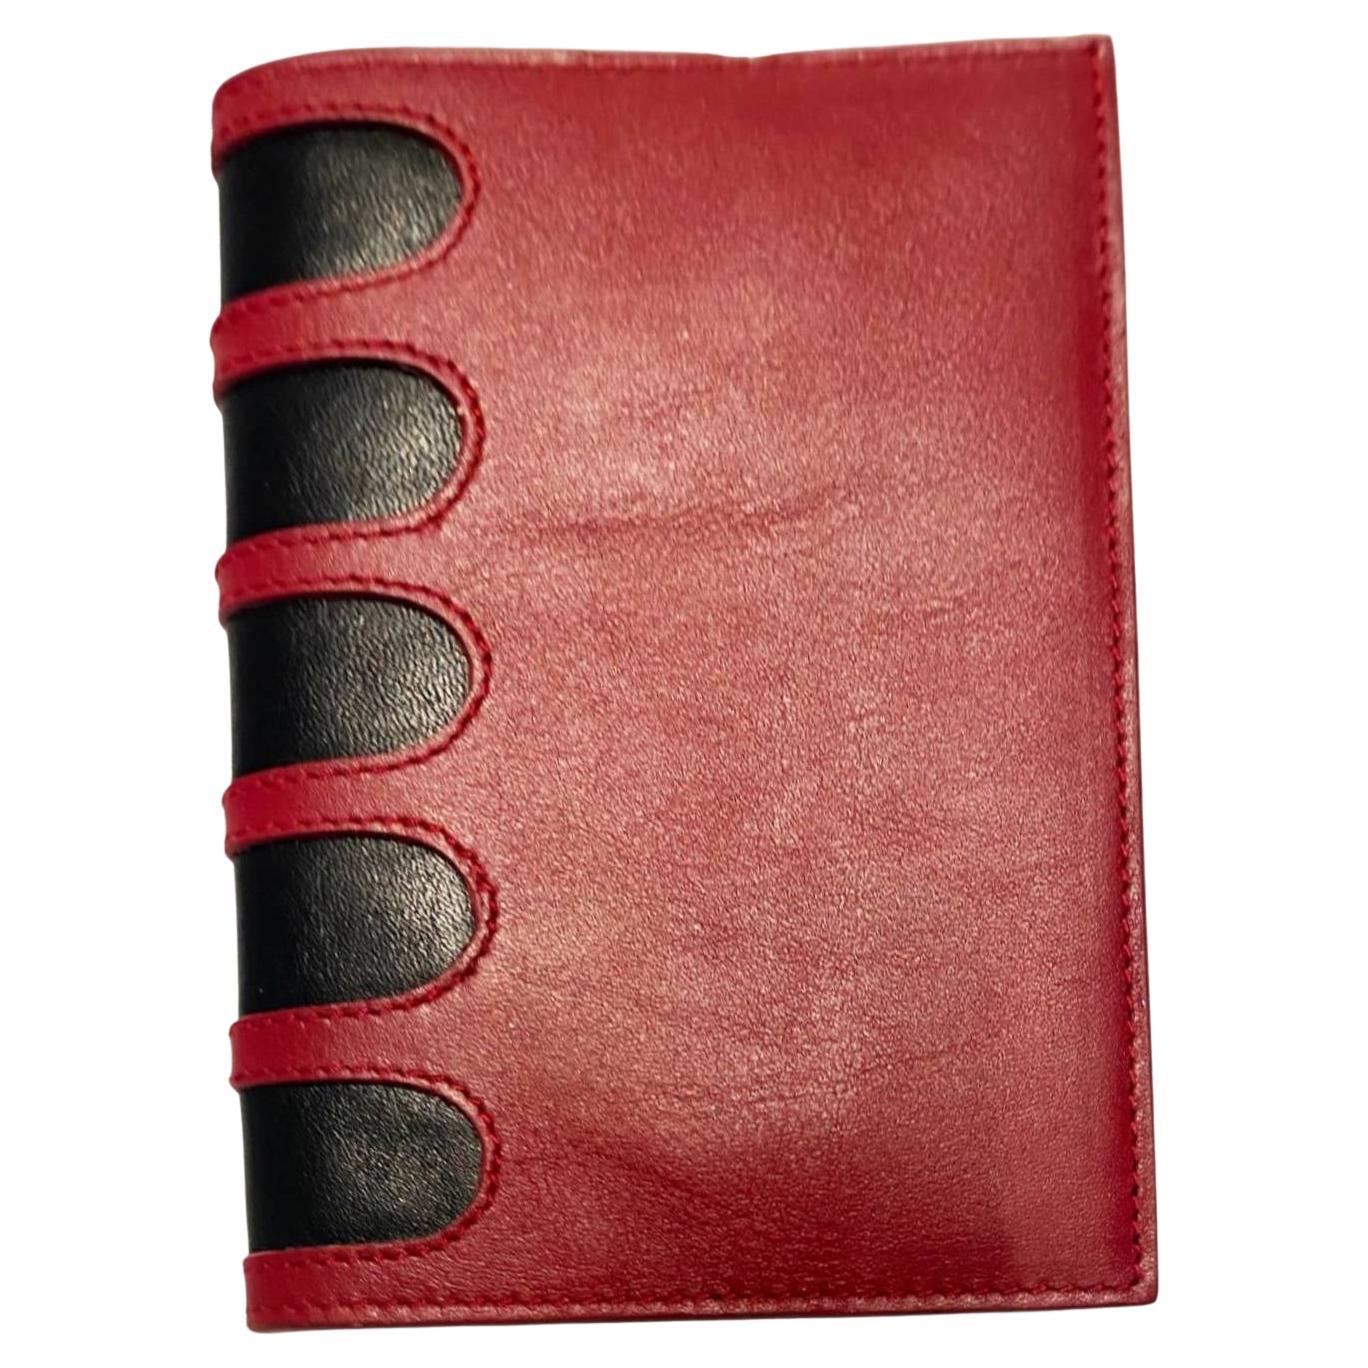 Manolo Blahnik Limited Edition Leather Passport Cover  For Sale